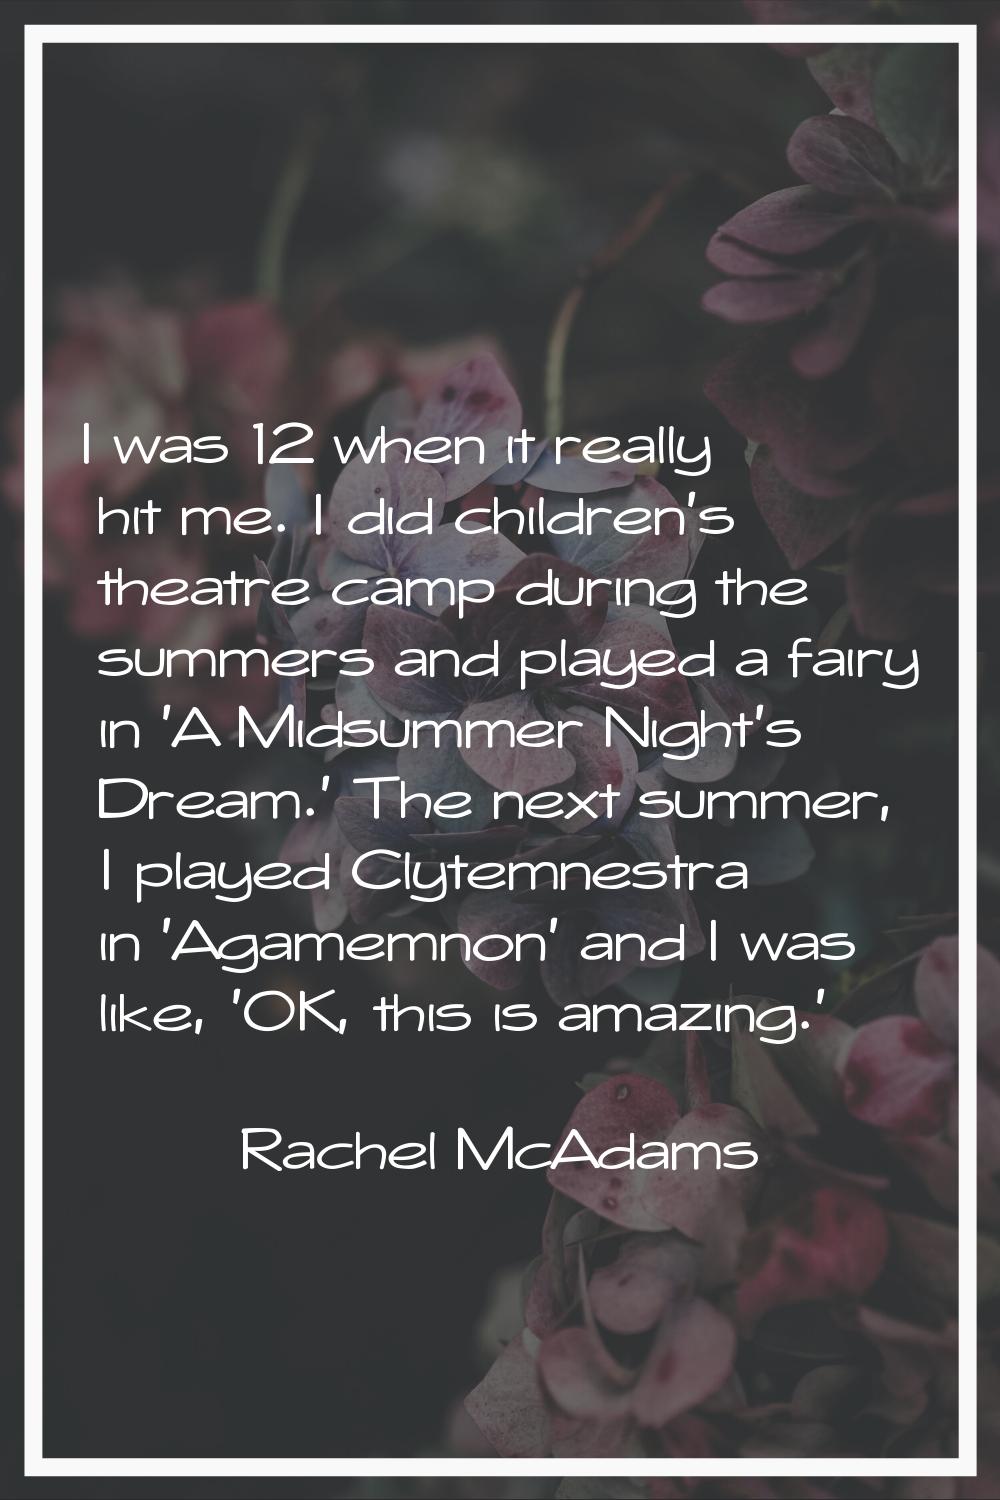 I was 12 when it really hit me. I did children's theatre camp during the summers and played a fairy